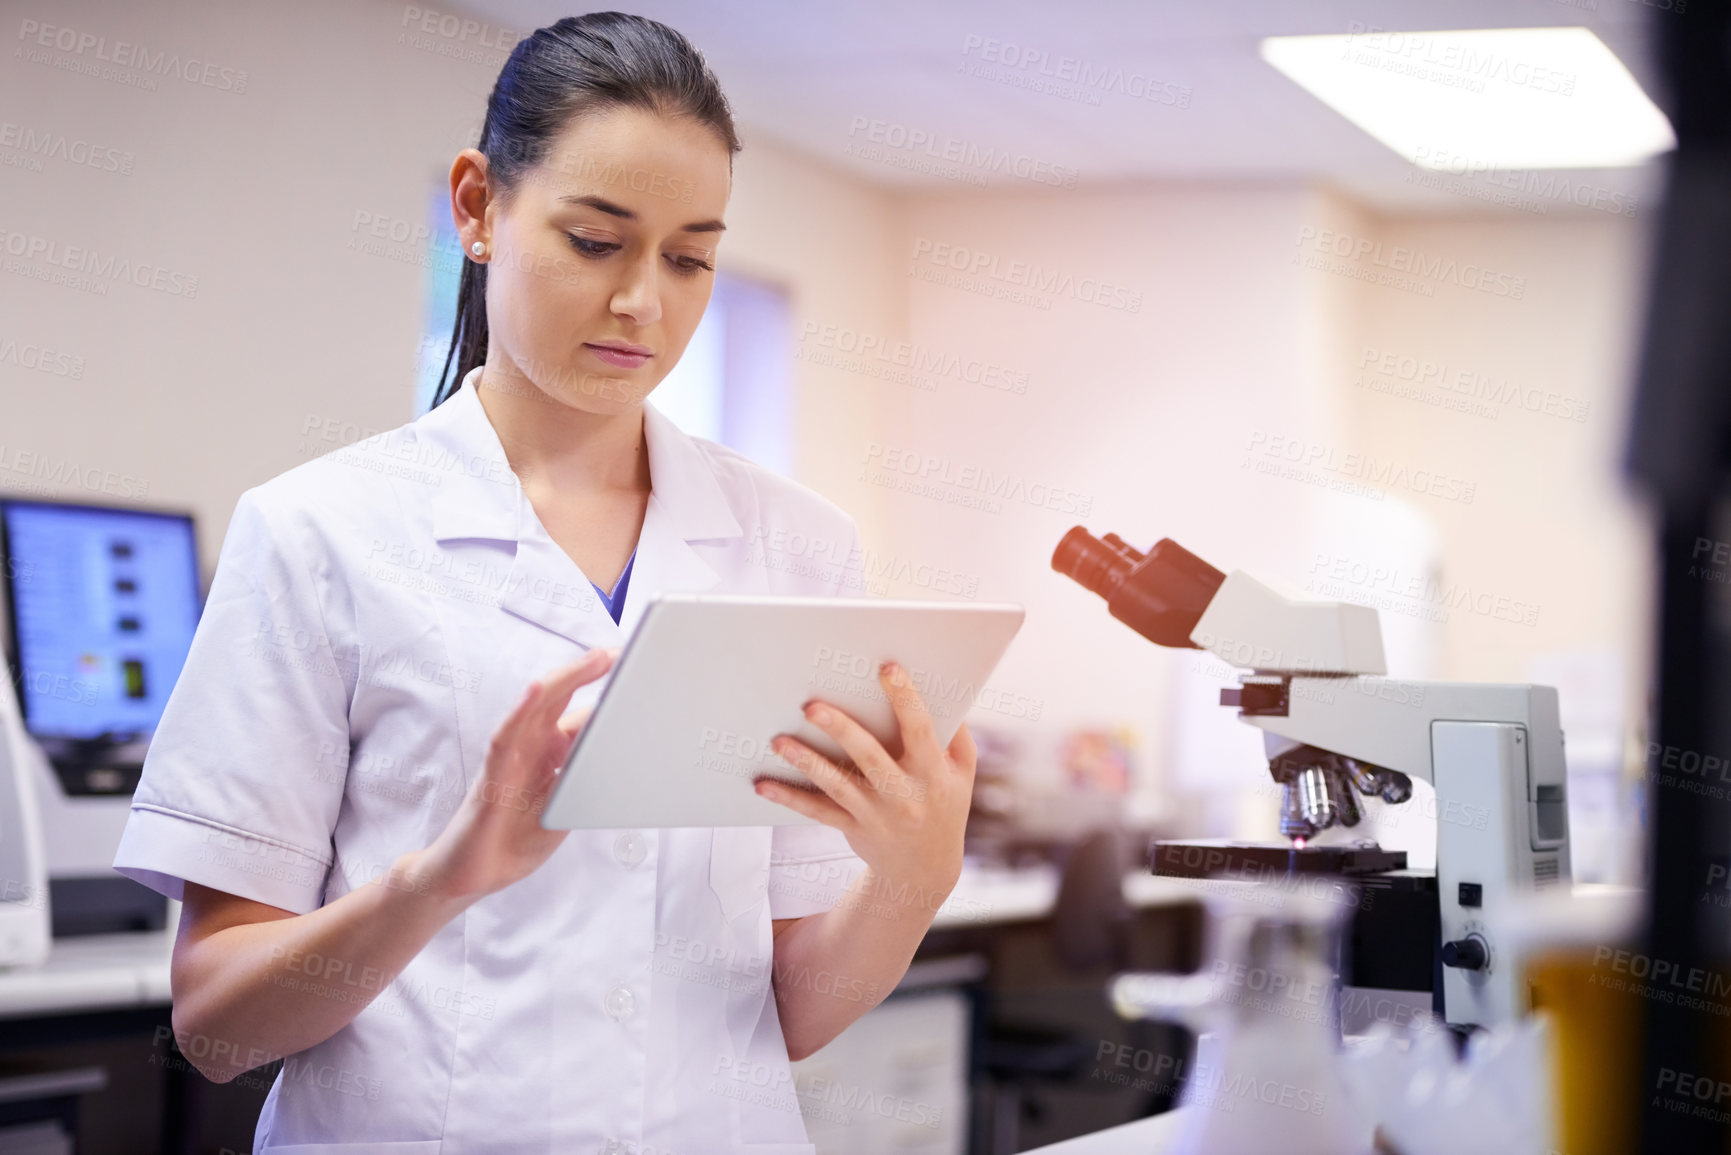 Buy stock photo Shot of a young scientist using a digital tablet while working in a laboratory